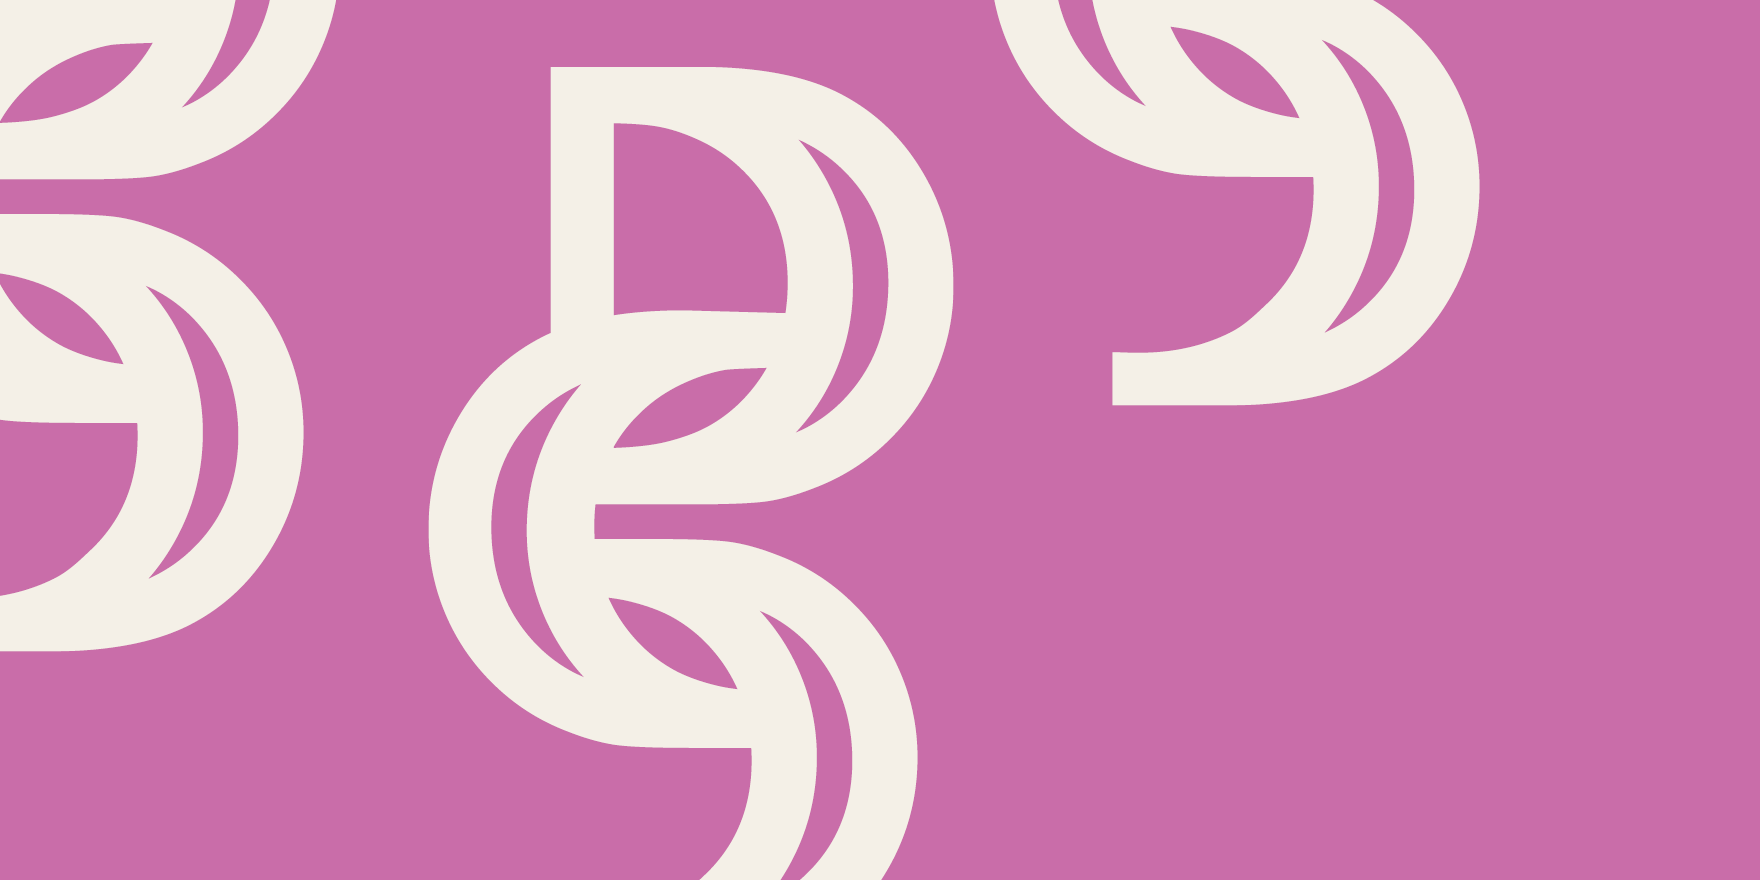 Abstract illustration of the letters D and S in white, intertwined on a pink background